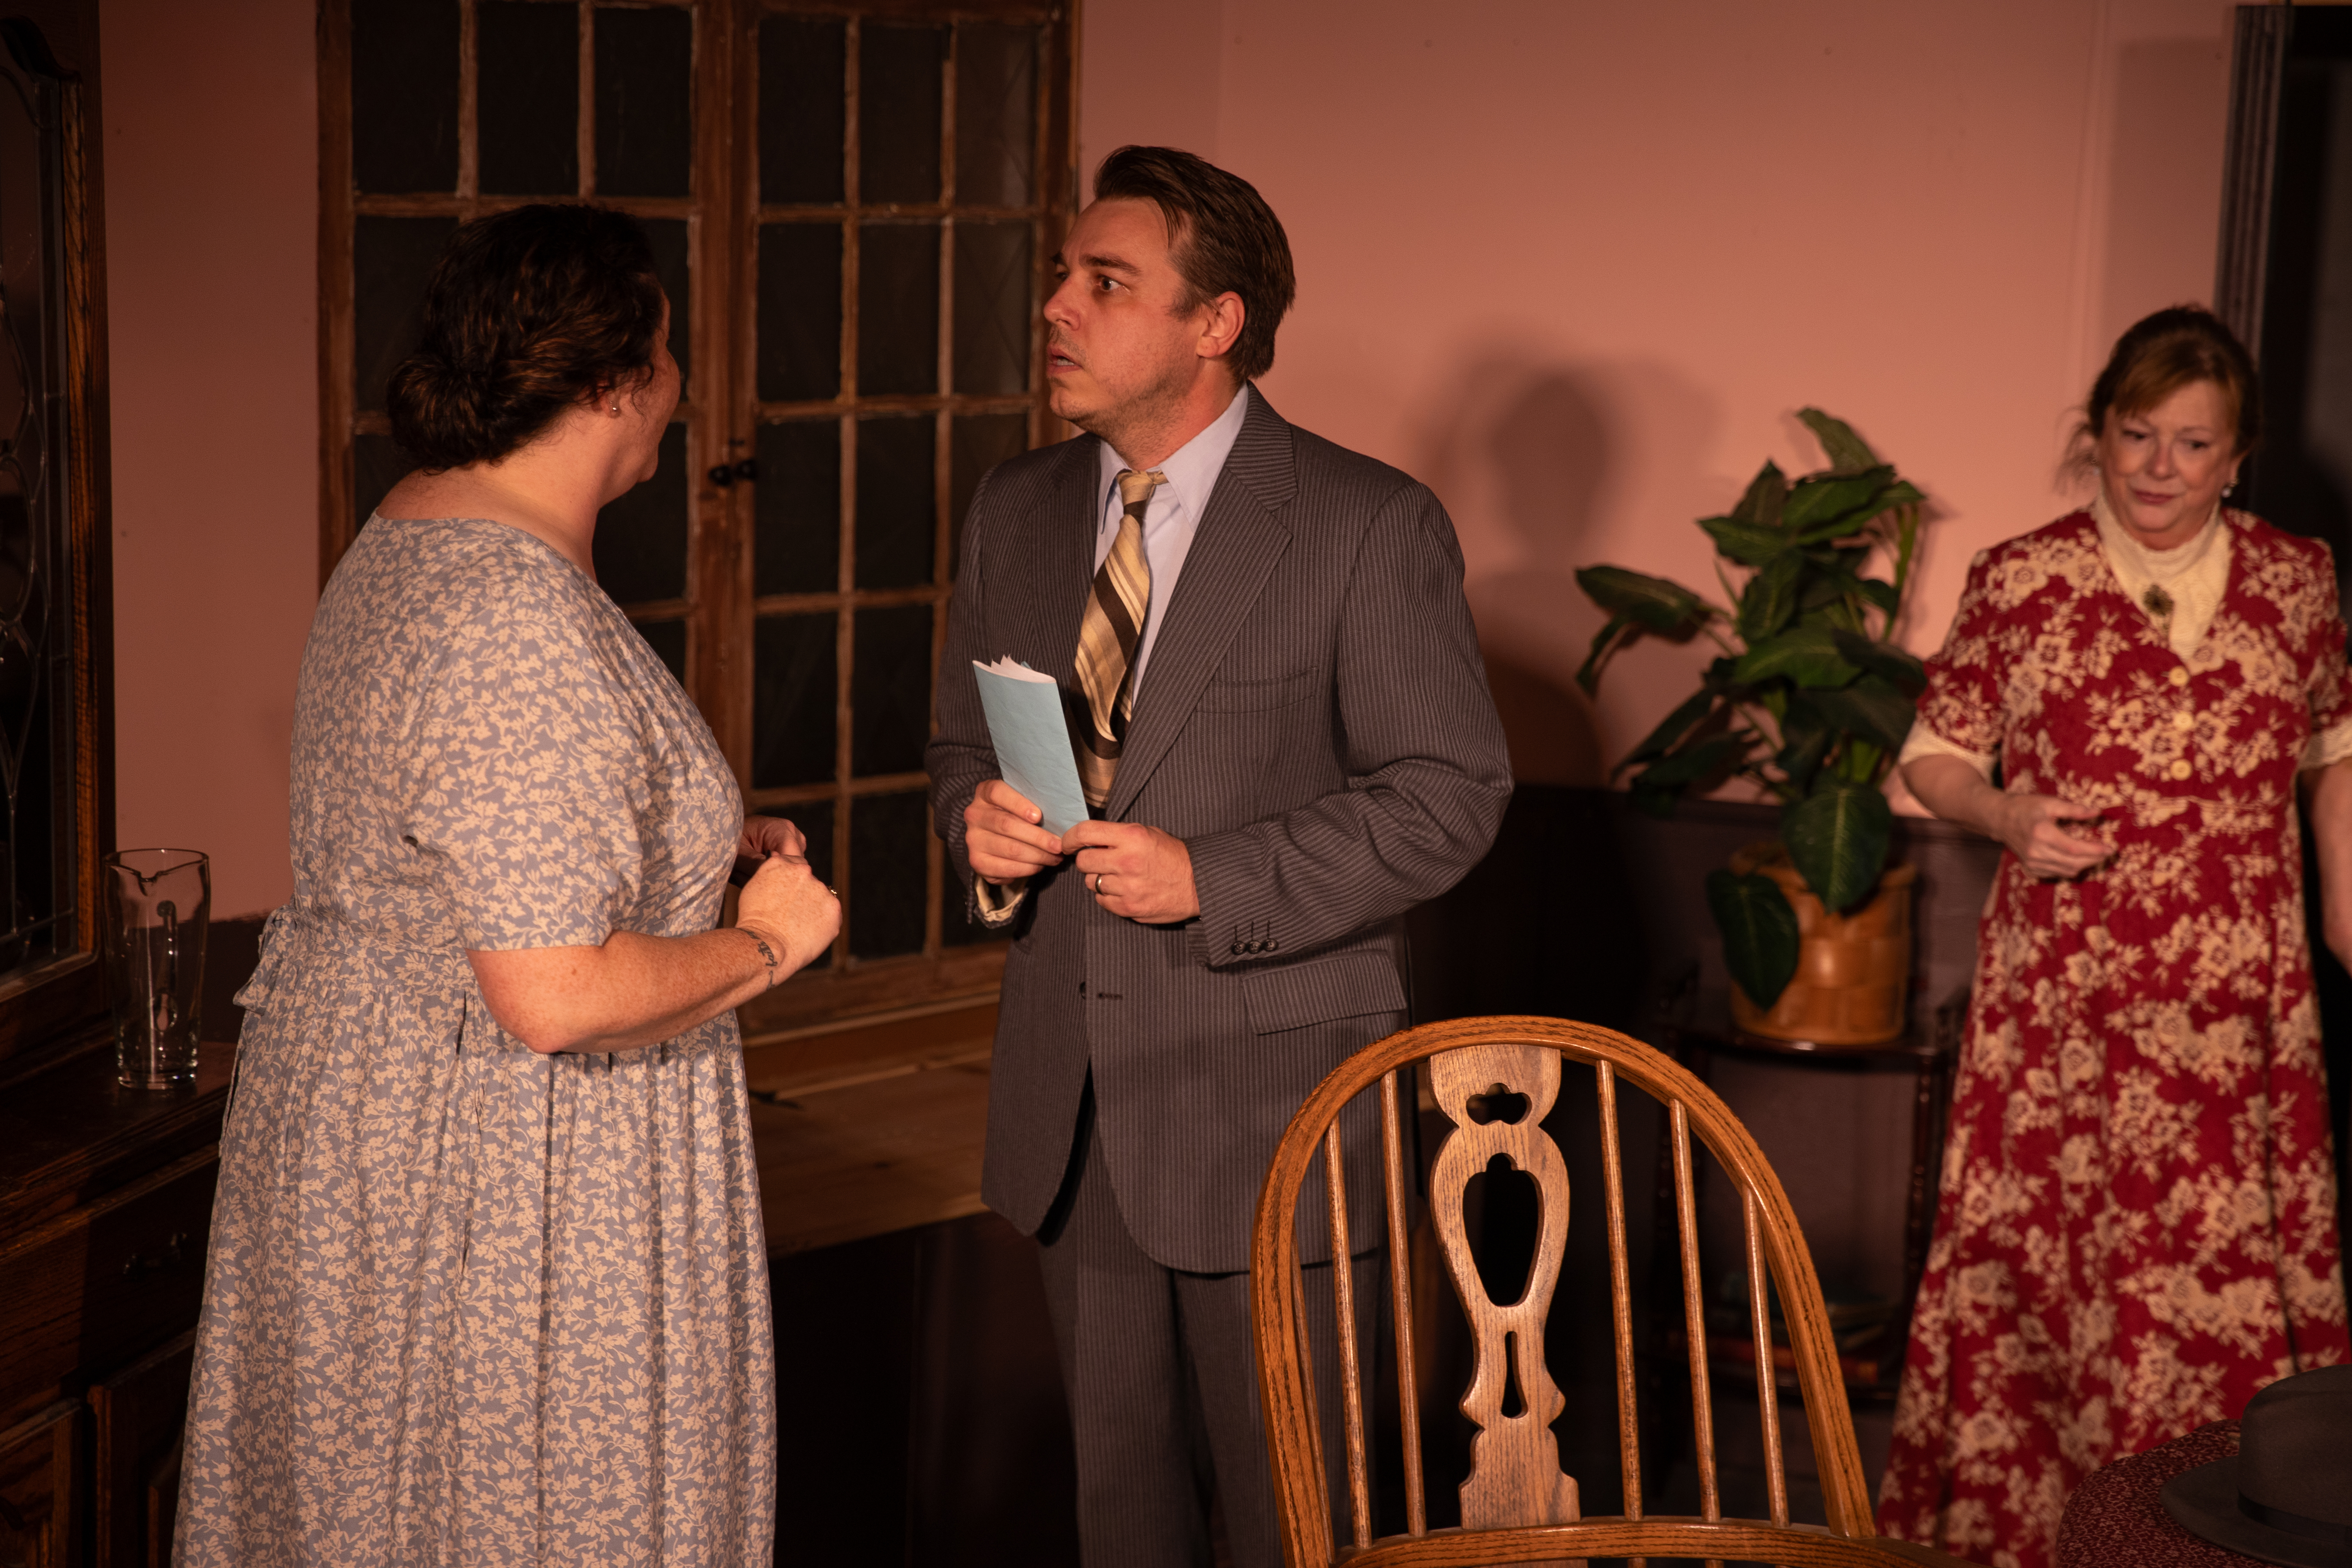 Denise Bishop Cotten as ABBY BREWSTER, Chris Linn as MORTIMER BREWSTER, and Lucy MacCabe Conner as MARTHA BREWSTER